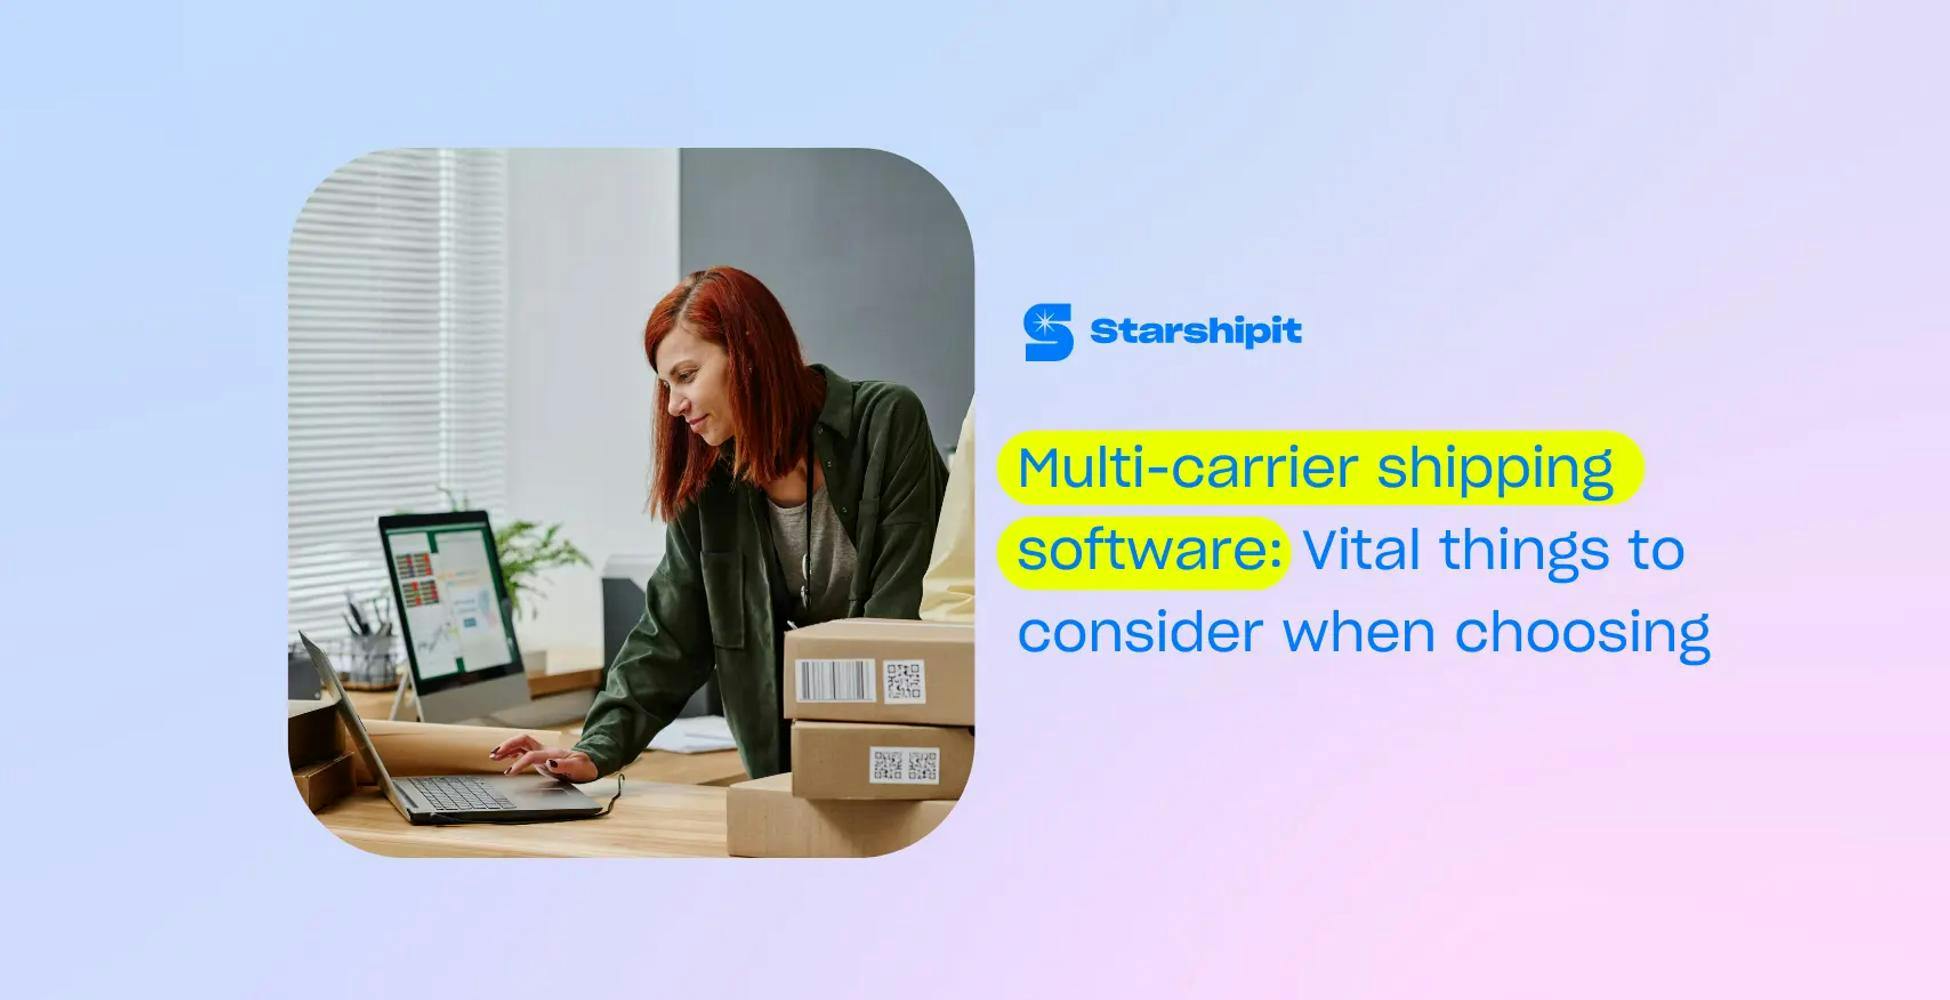 Multi-carrier shipping software